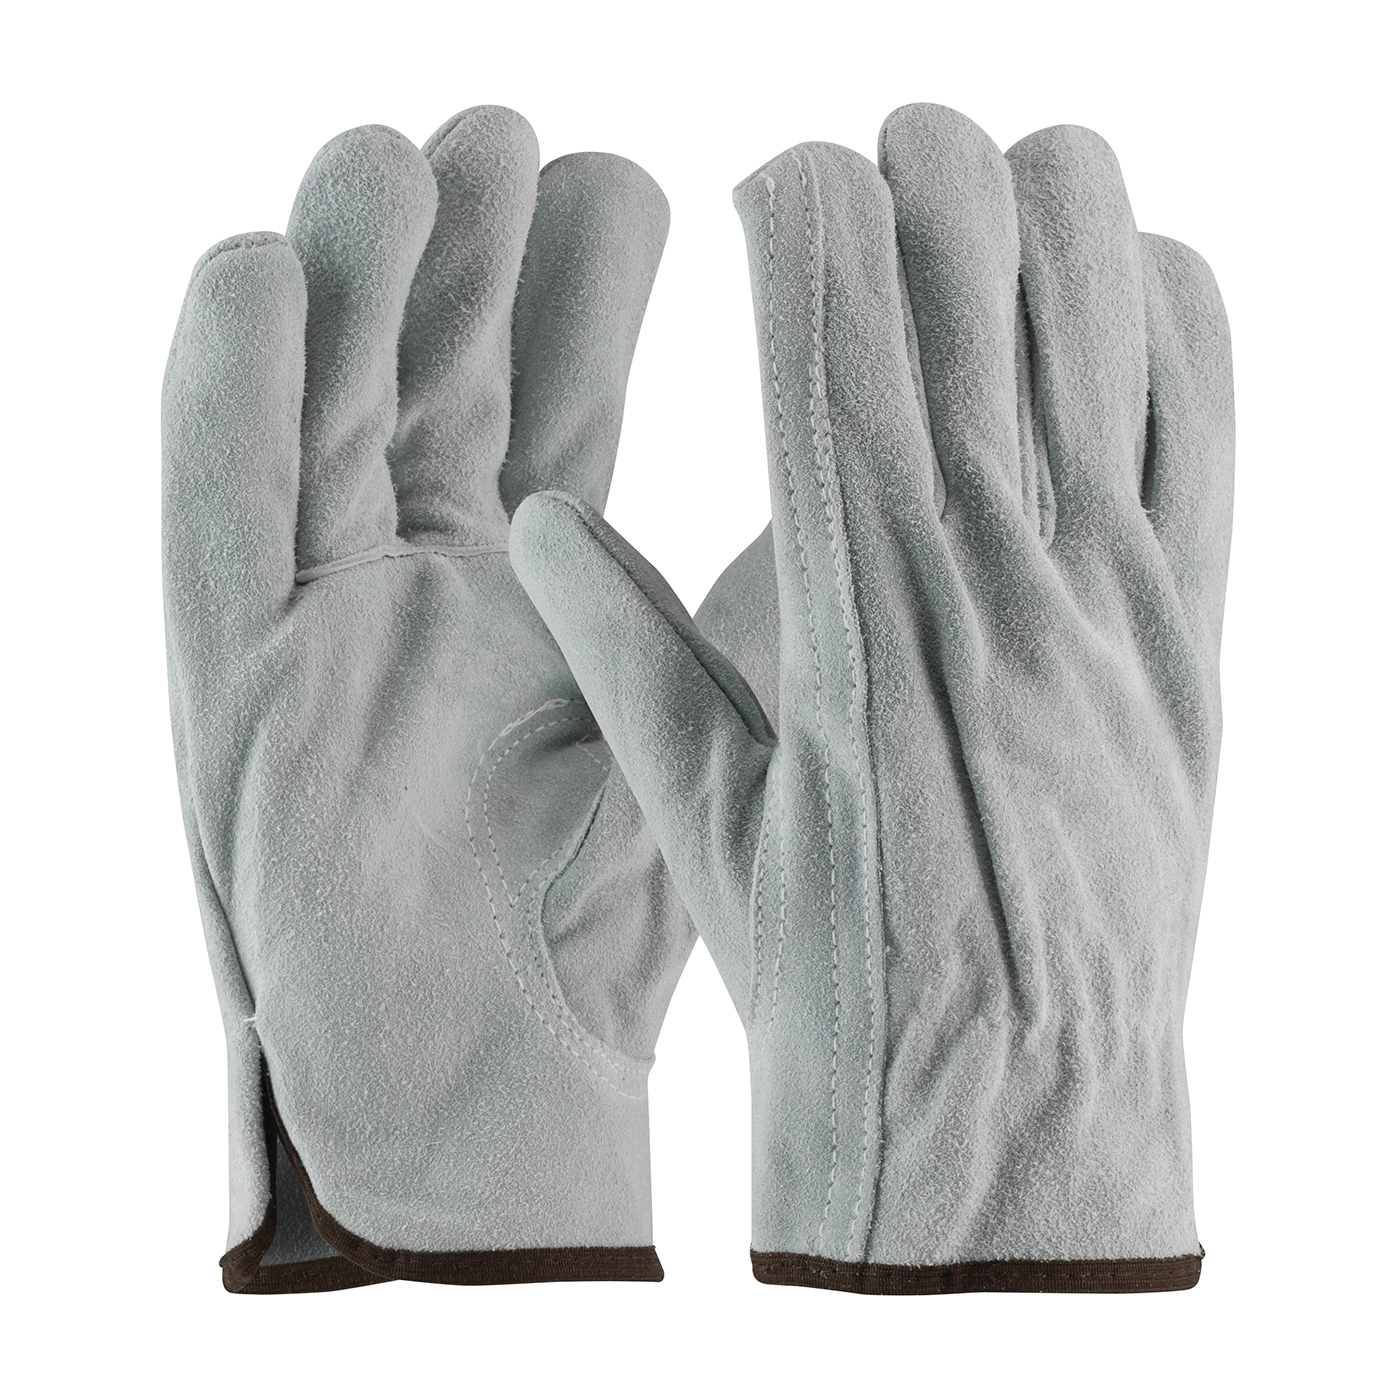 PIP® 69-189/S Premium Grade General Purpose Gloves, Drivers, S, Split Cowhide Leather Palm, Split Cowhide Leather, Gray, Slip-On Cuff, Uncoated Coating, Resists: Abrasion, Unlined Lining, Keystone Thumb